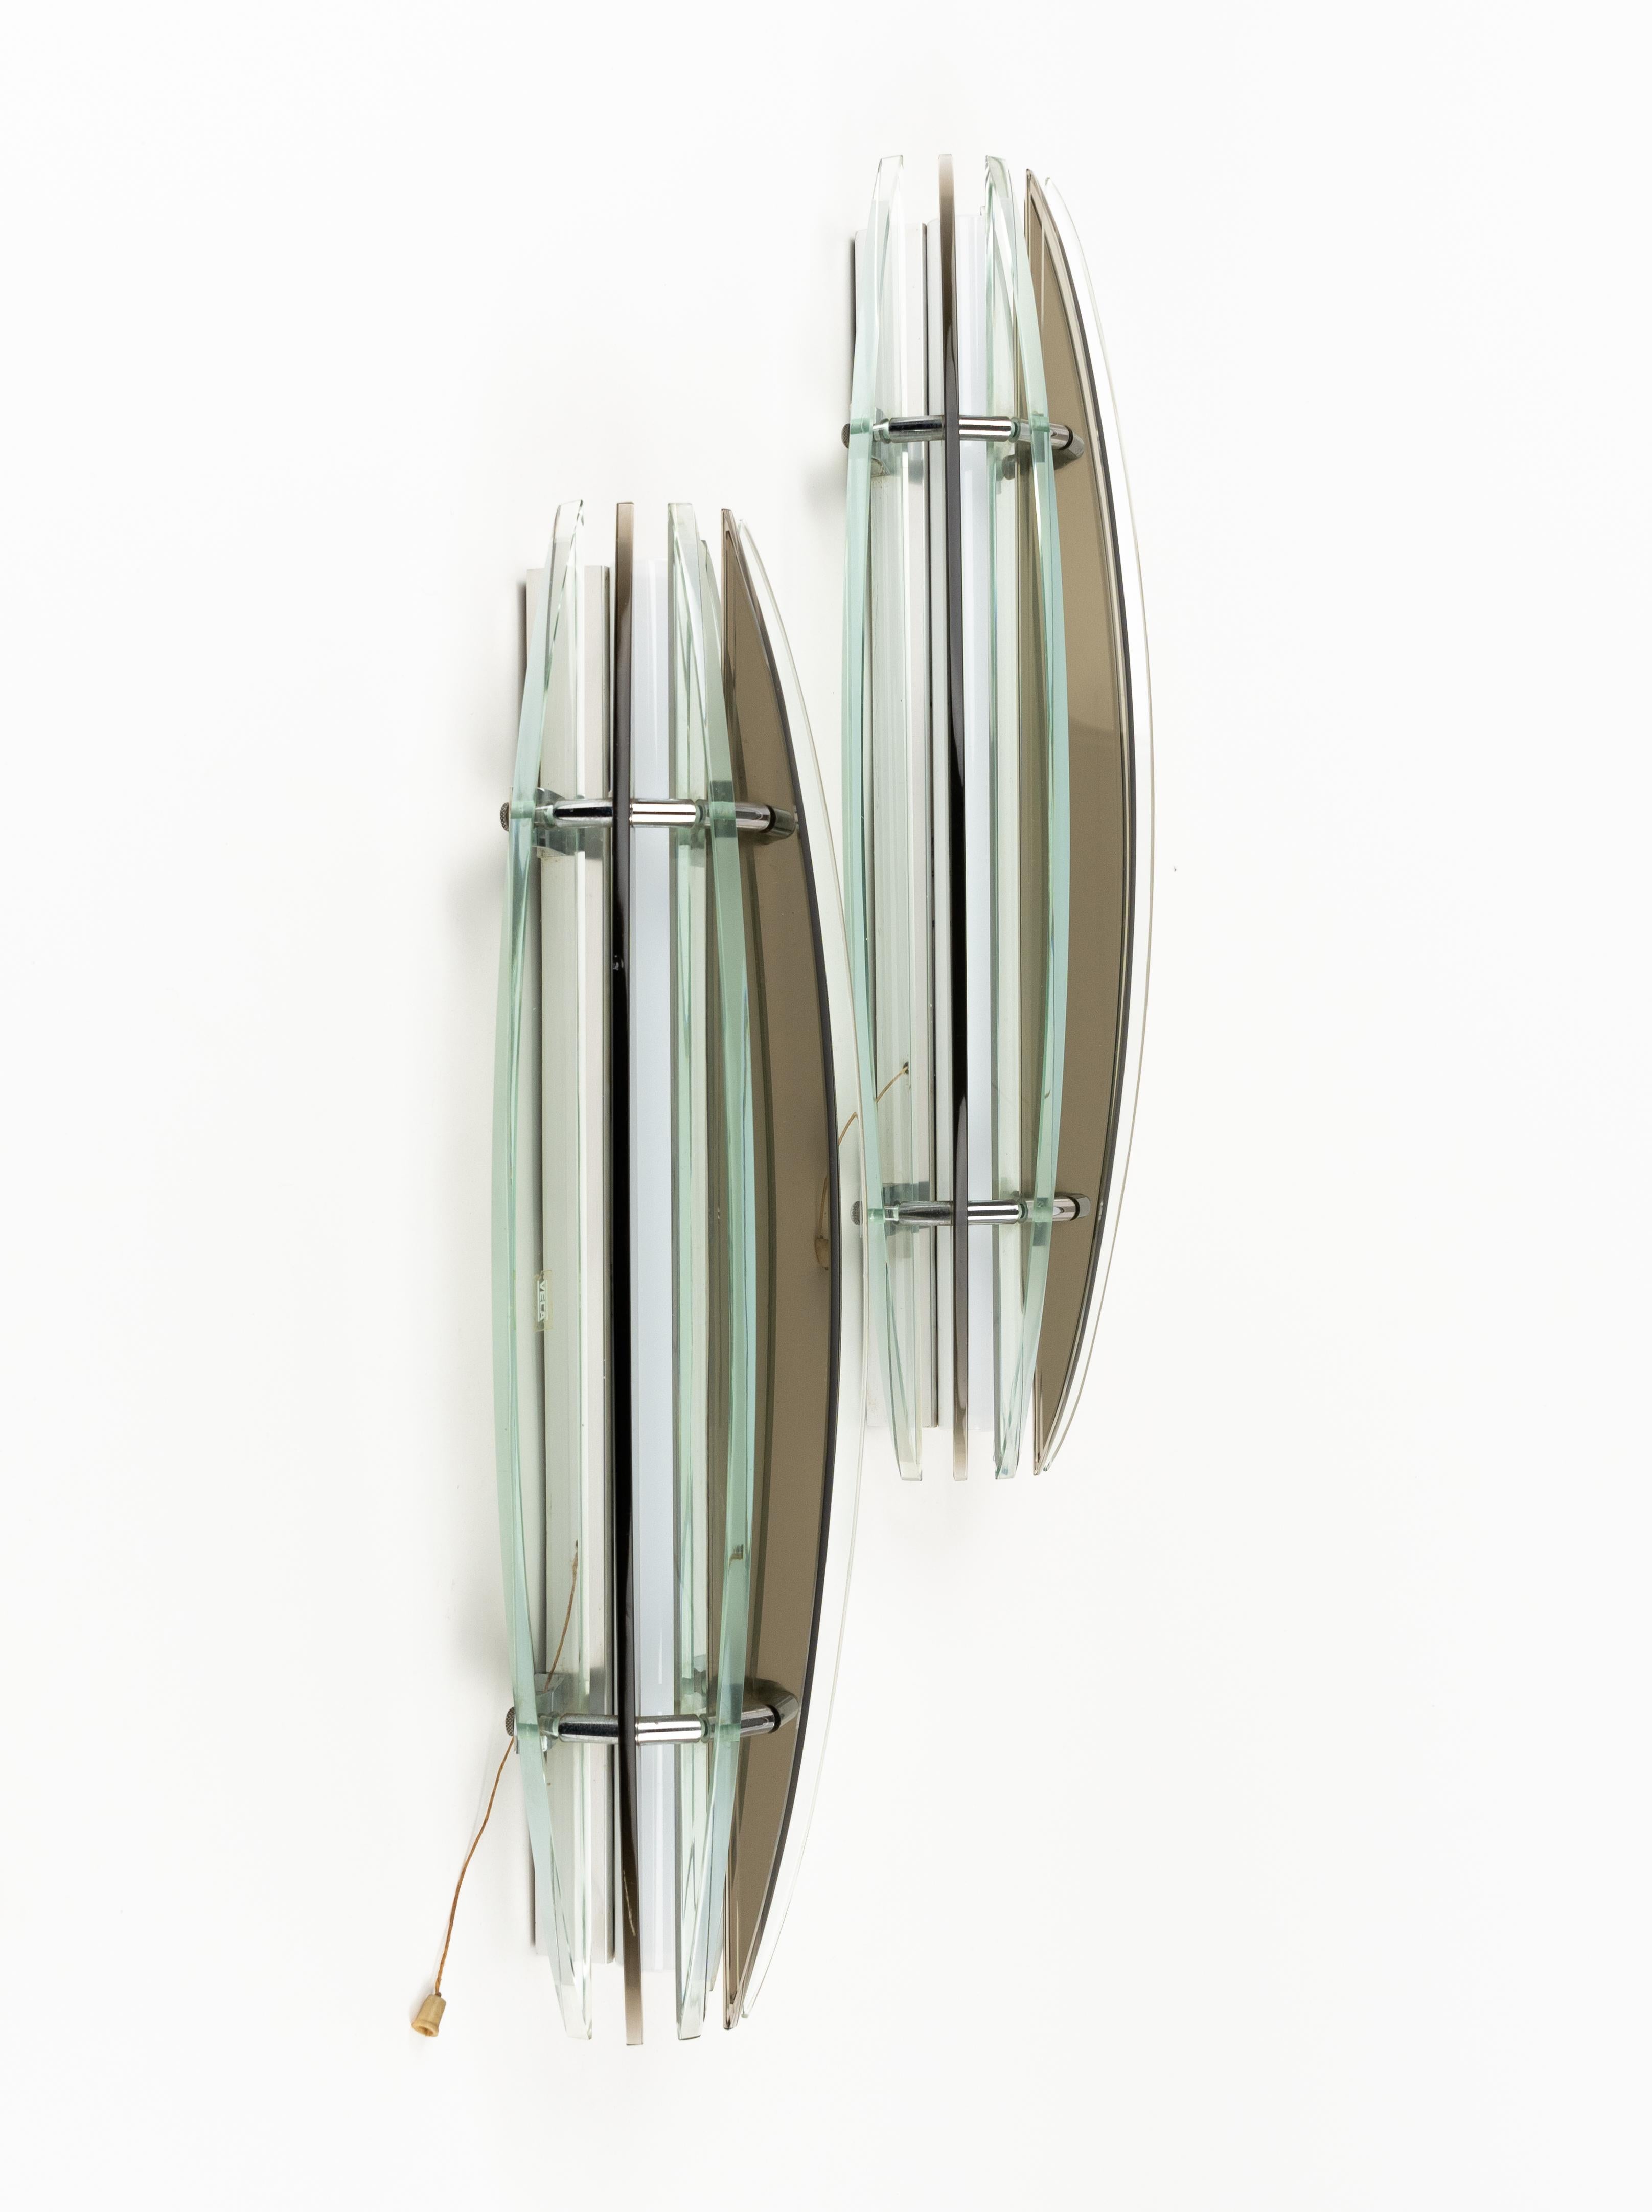 Italian Midcentury Large Pair of Sconces in Colored Glass & Chrome by Veca, Italy, 1970s For Sale